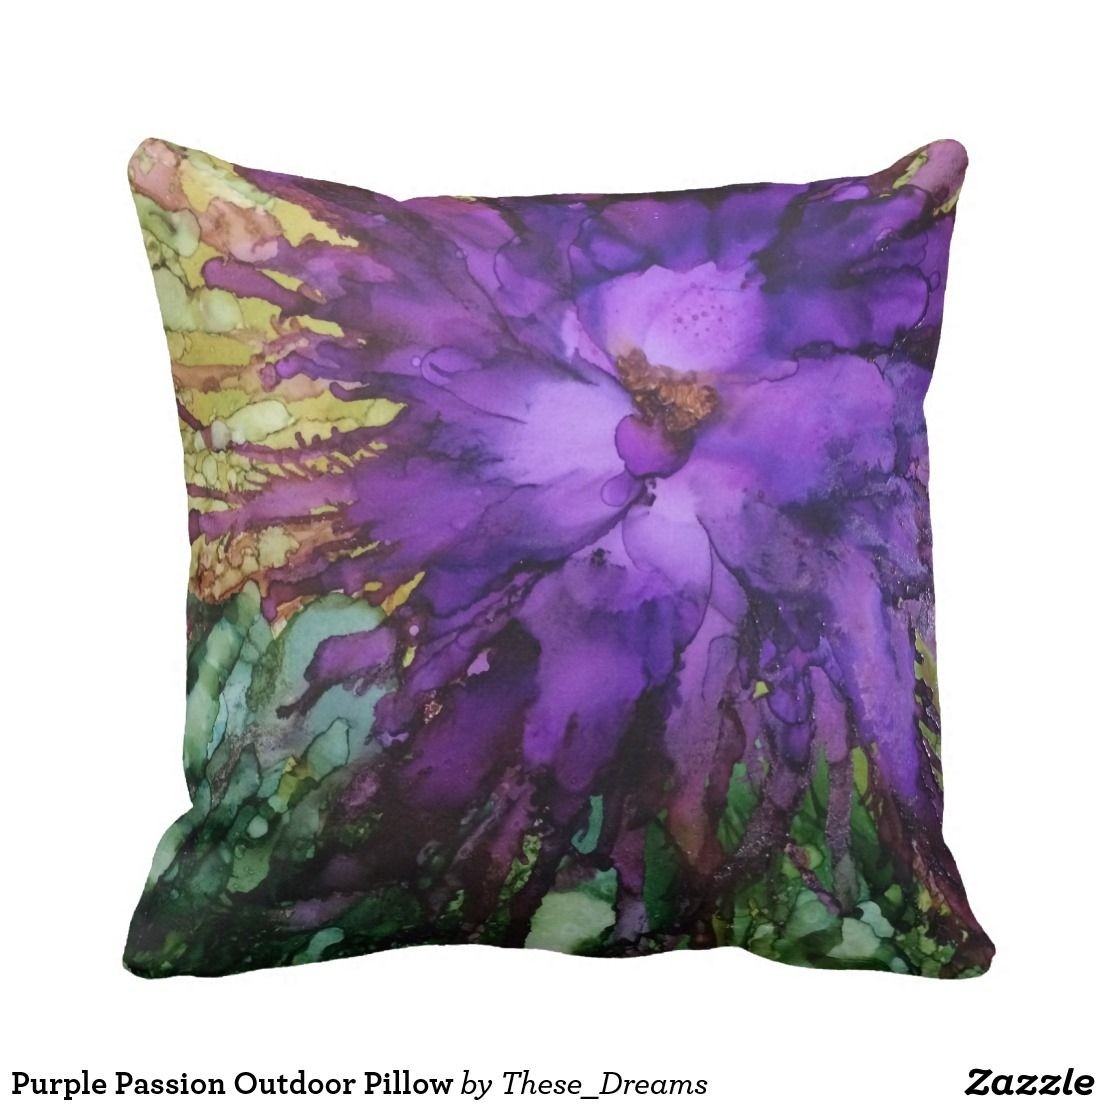 Purple passion outdoor pillow outdoor pillows vintage